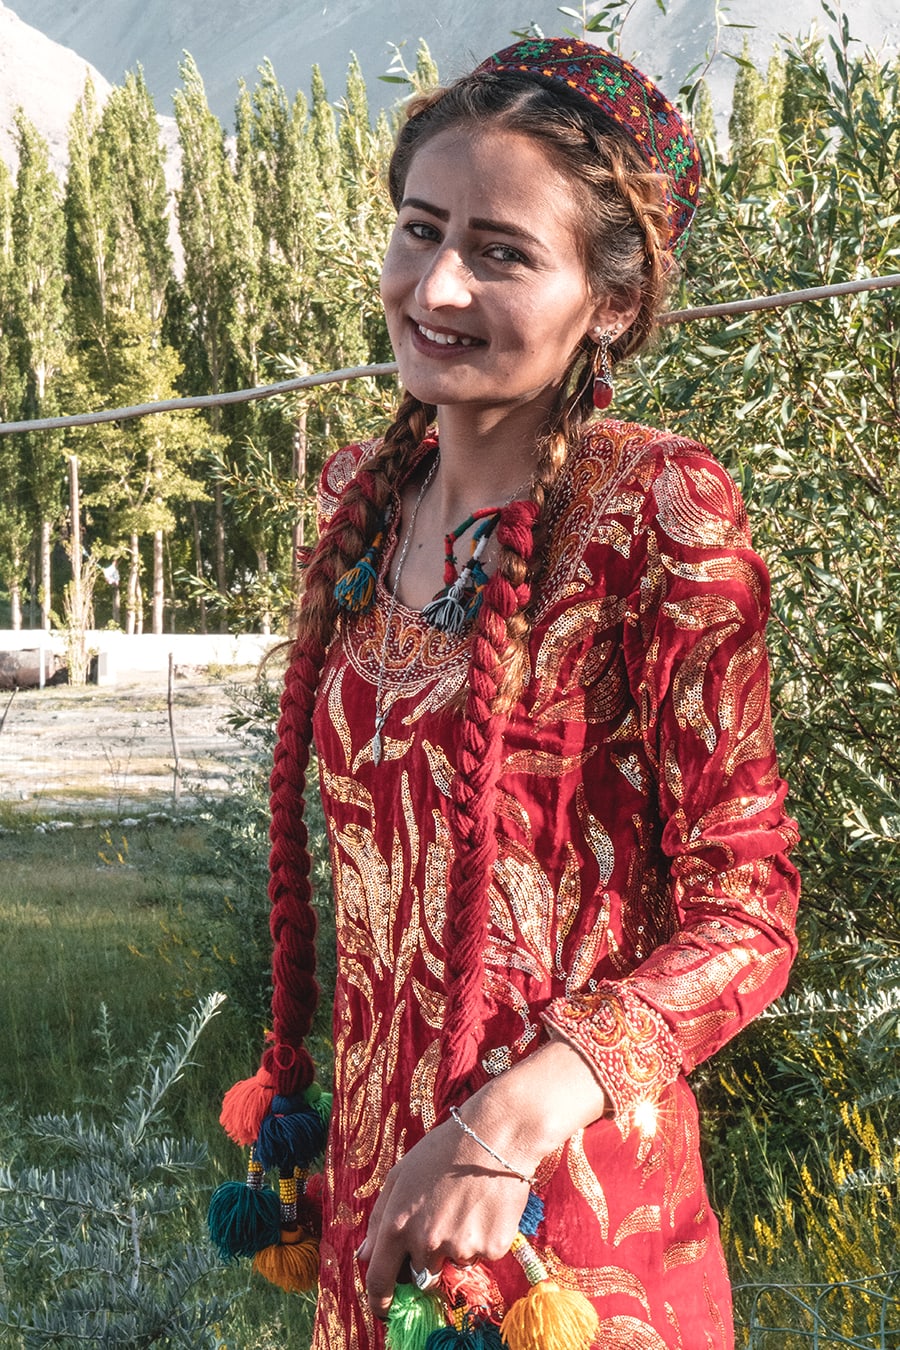 Wakhi woman dressed in tradional dress at a festival near Langar, in the Wakhan Valley.